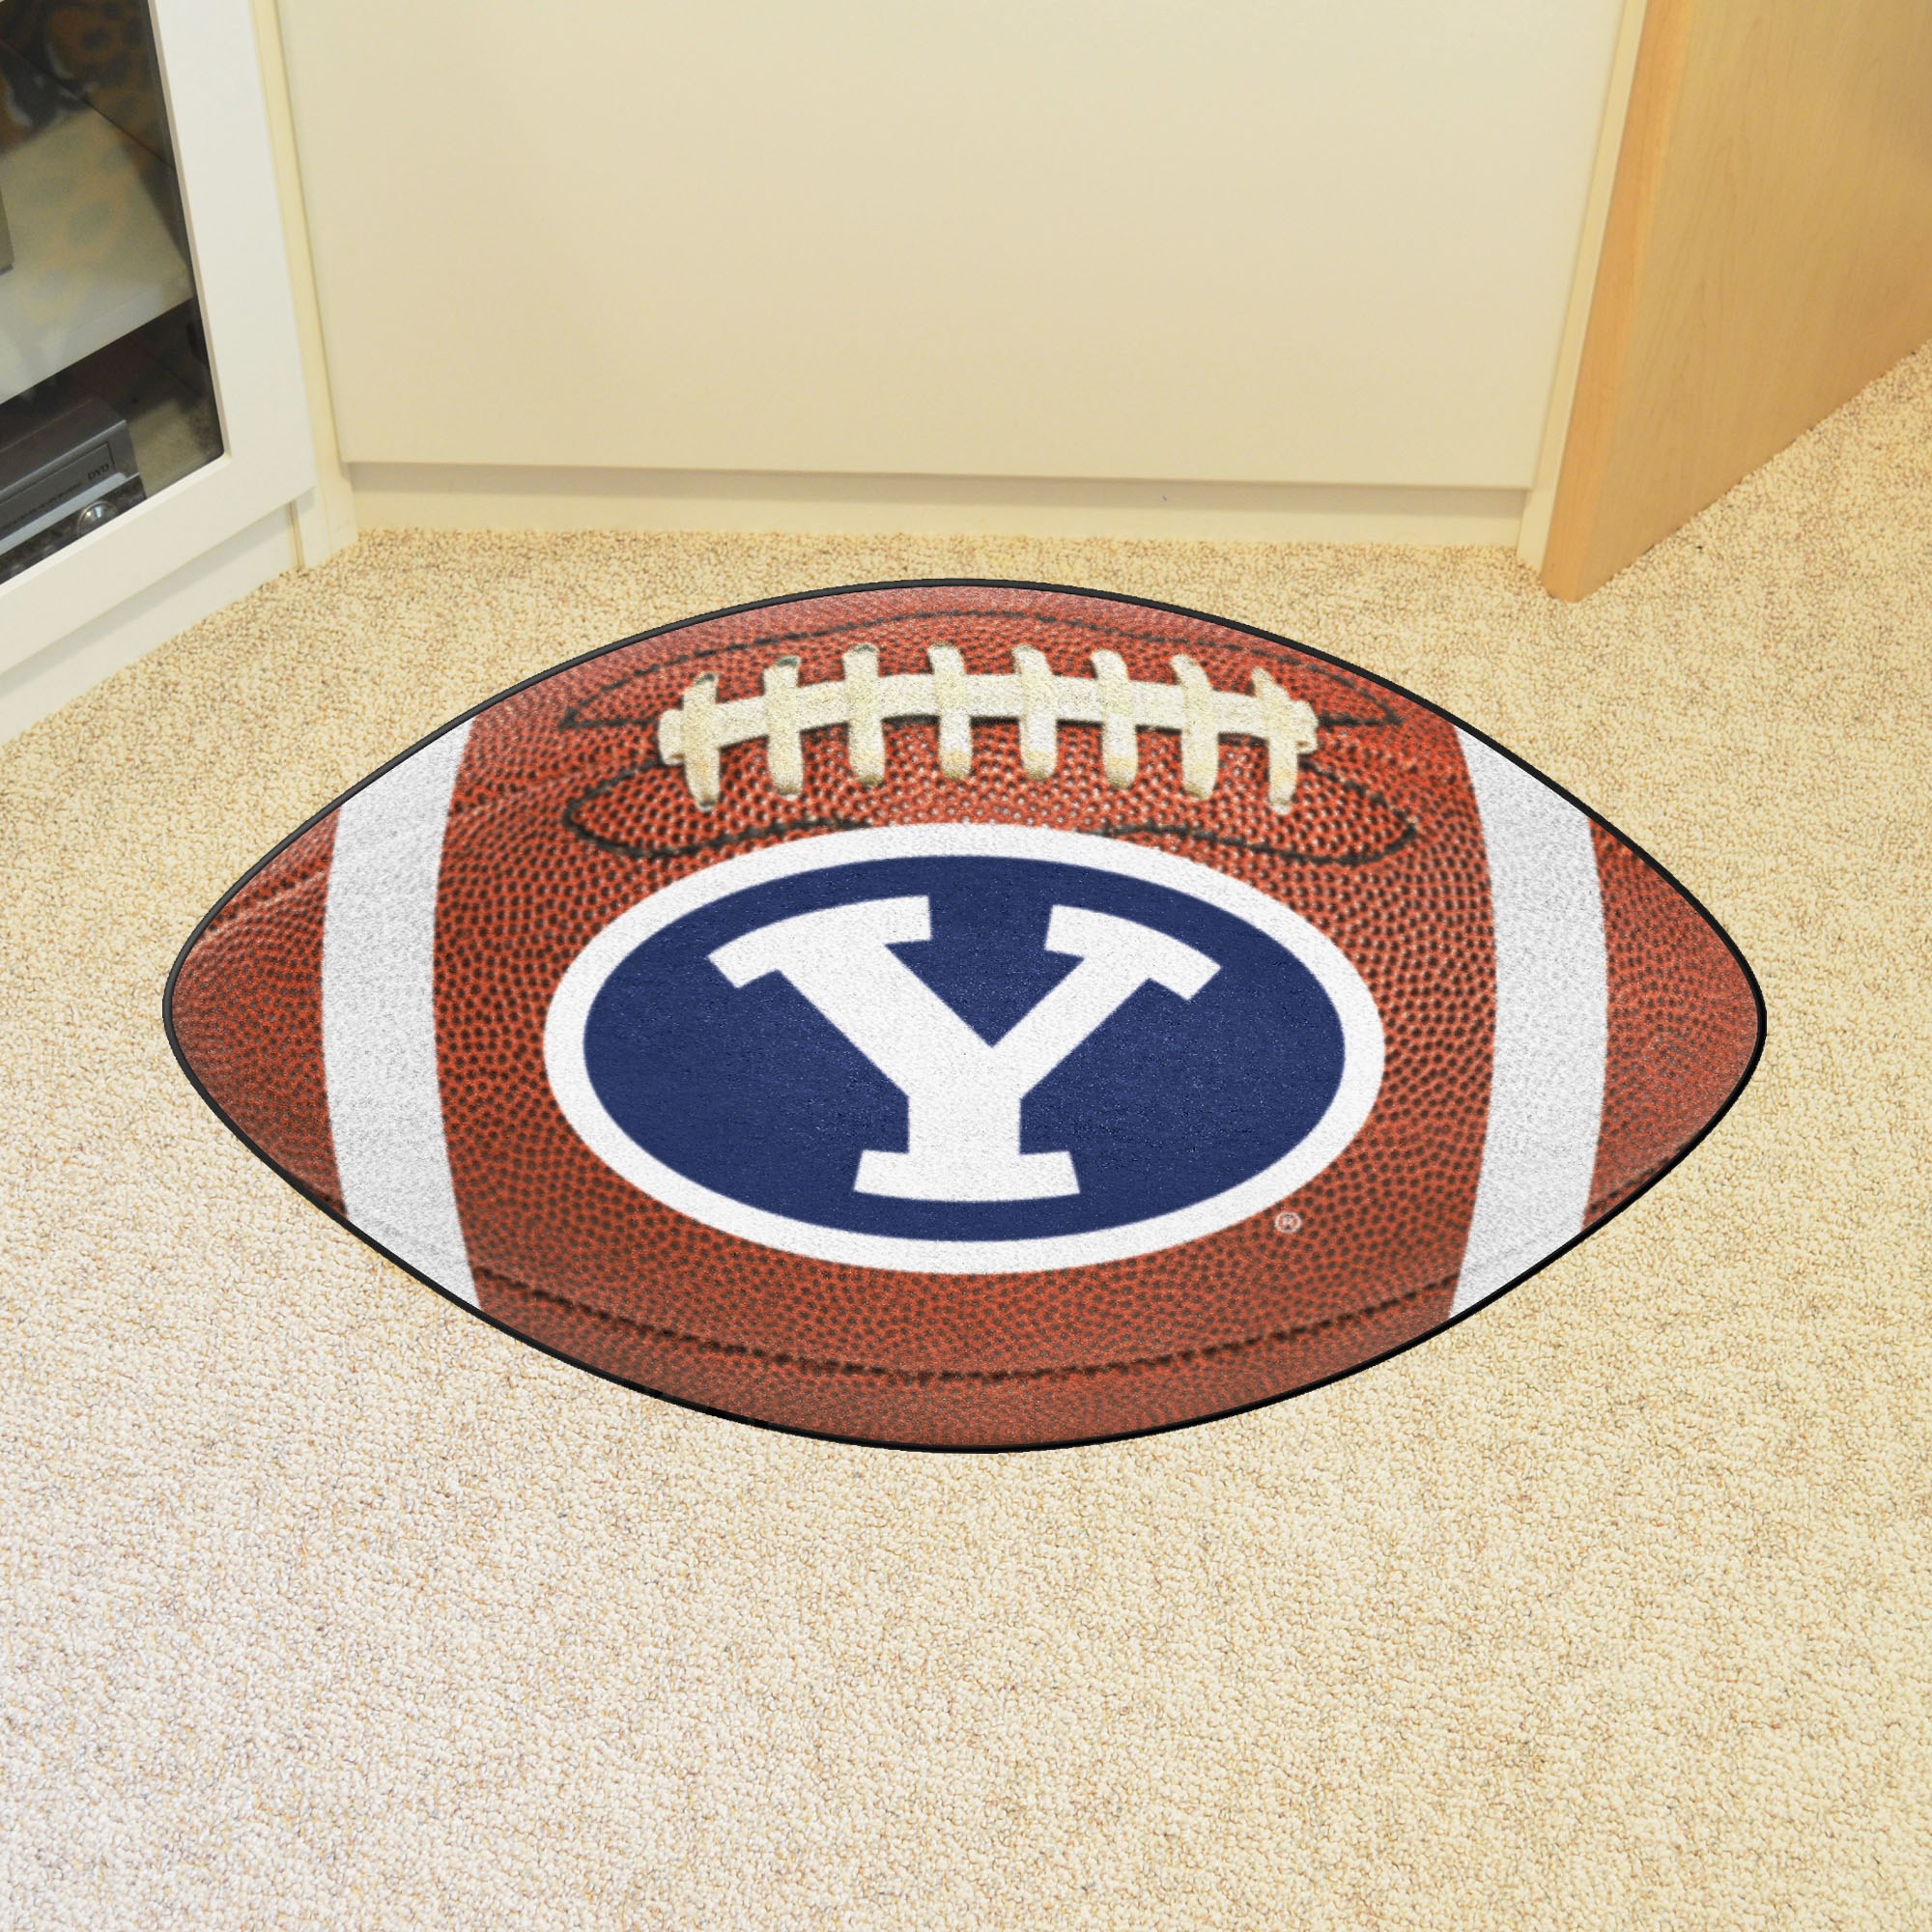 Brigham Young University Ball Shaped Area Rugs (Ball Shaped Area Rugs: Football)